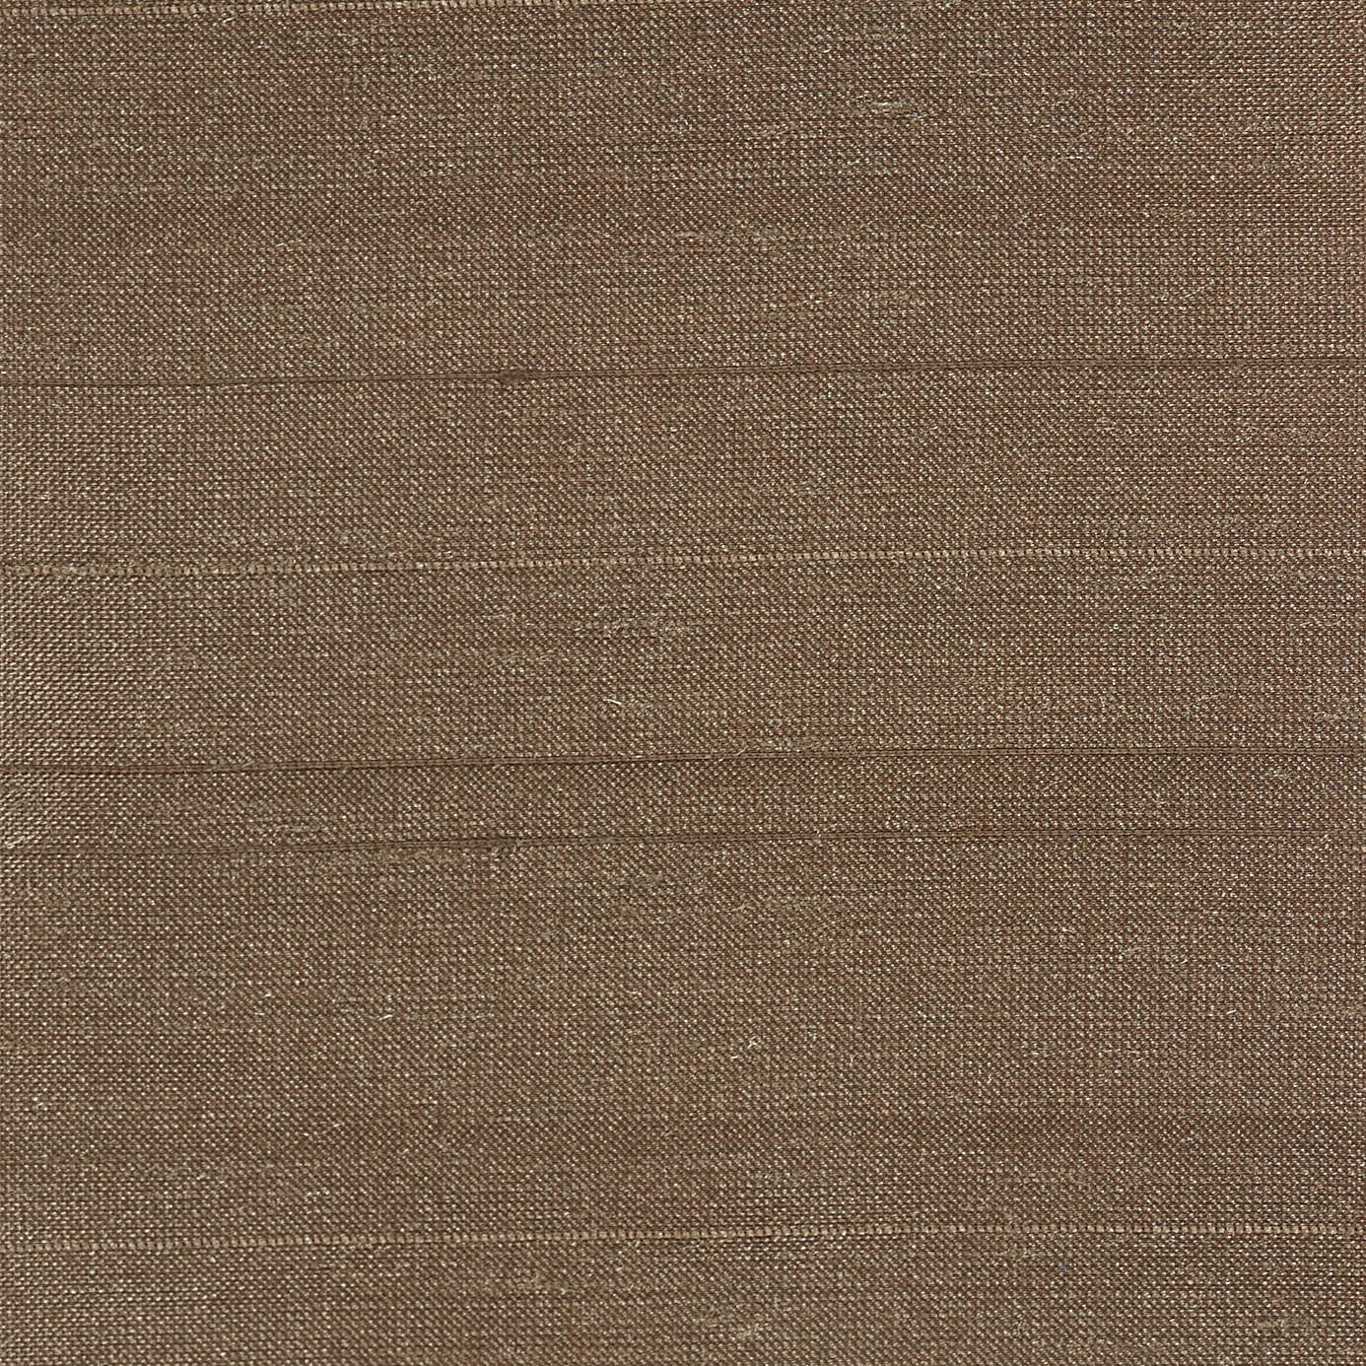 Deflect Fabric by Harlequin - HPOL440458 - Truffle